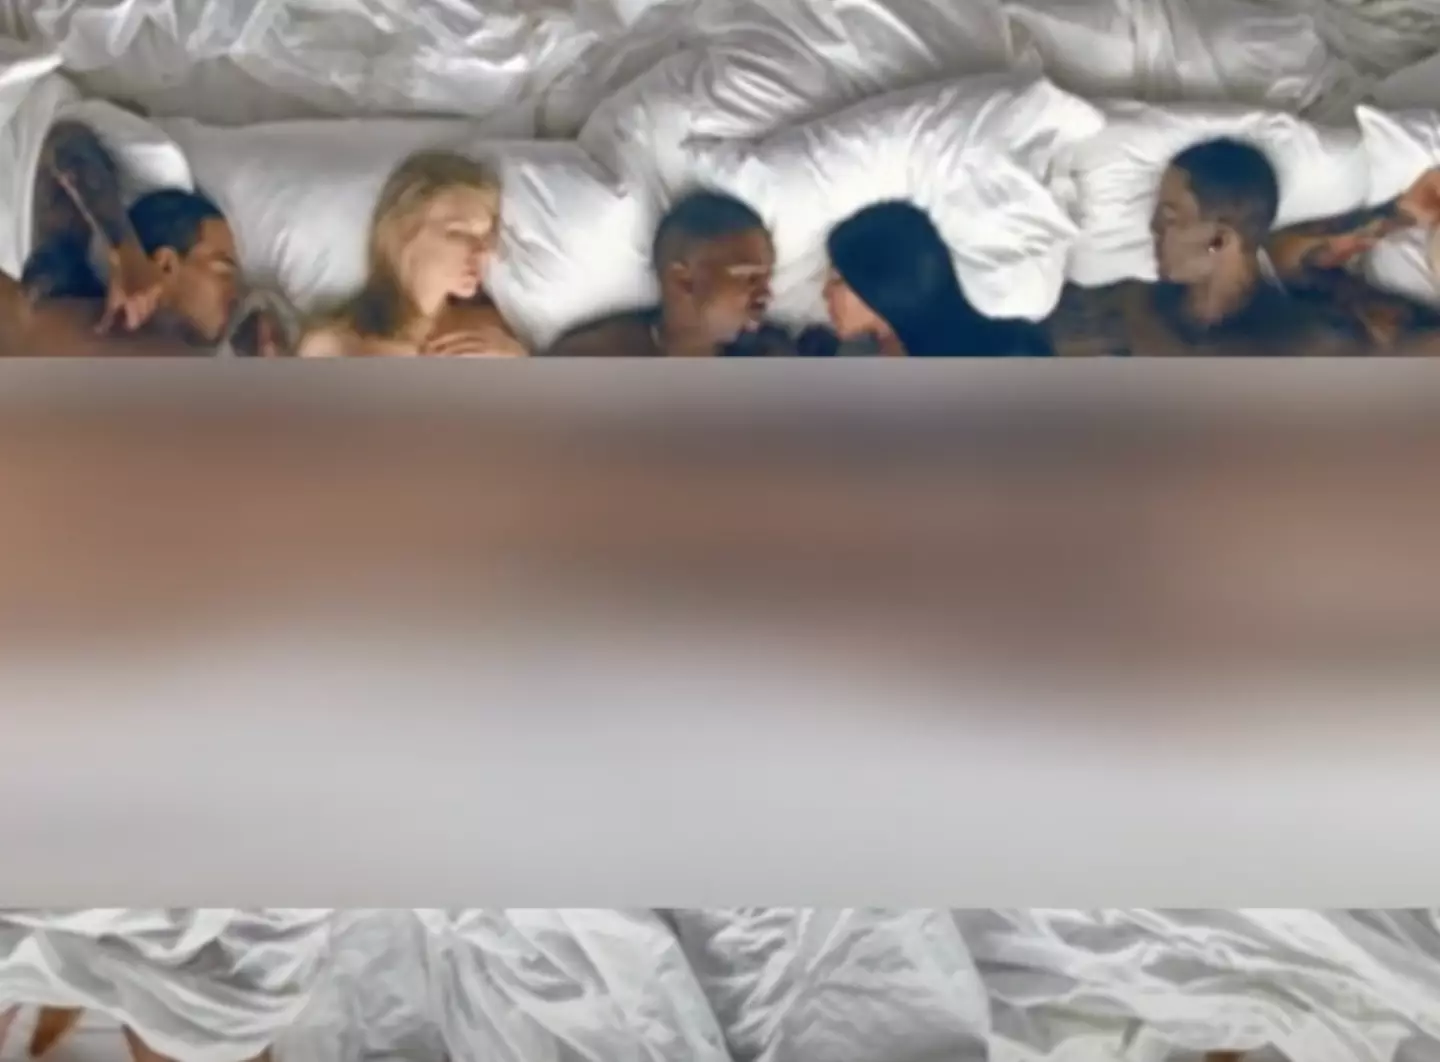 The bizarre music video saw Kanye lying naked in a bed alongside ex-wife Kim Kardashian, a topless (prosthetic) Taylor Swift, and many others.